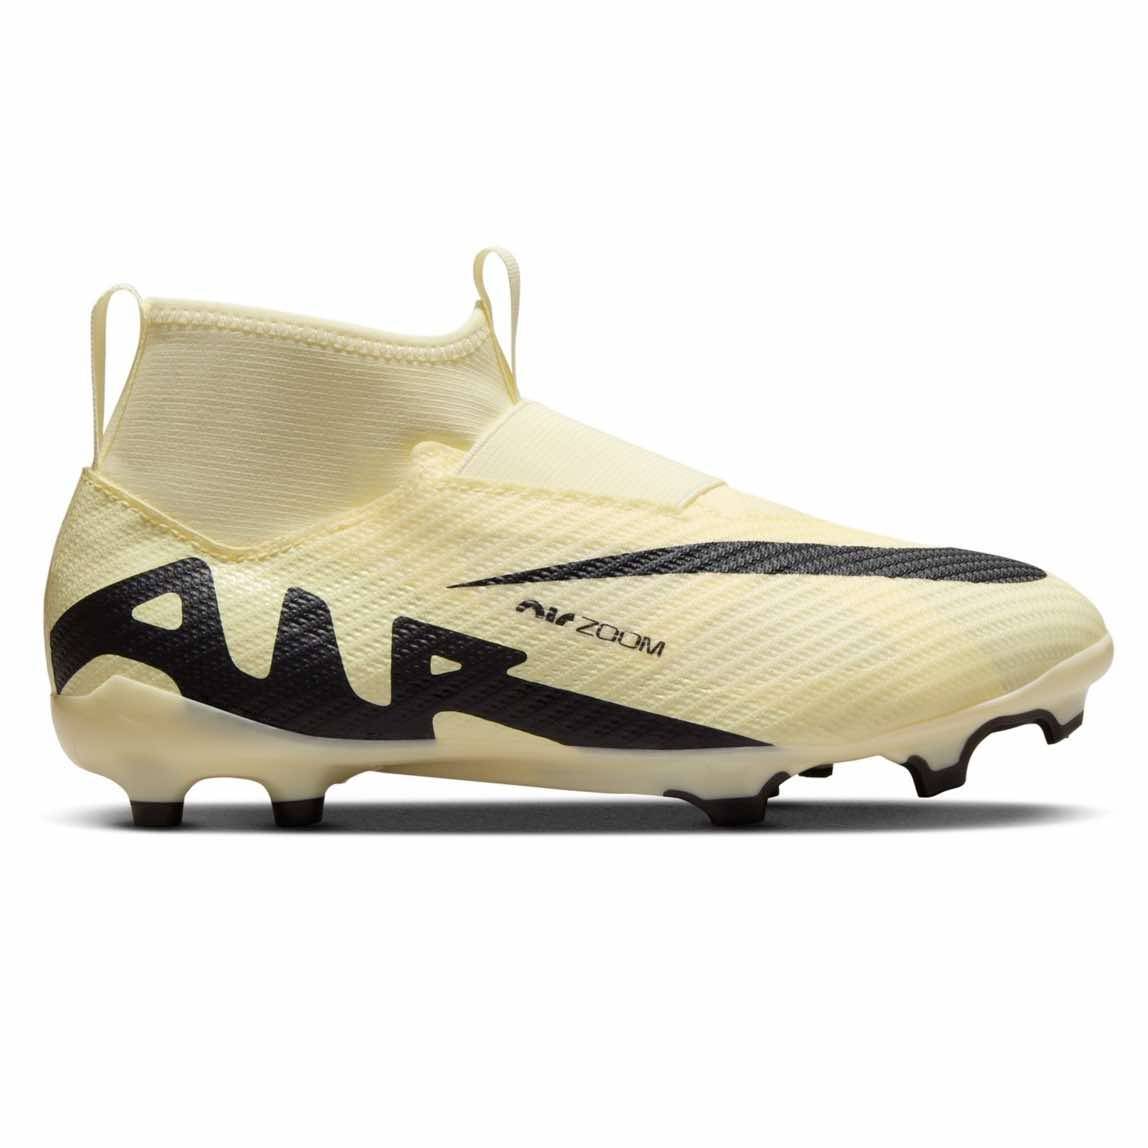 Premium FG Firm Ground Soccer Cleats in Pink, Black and Gold